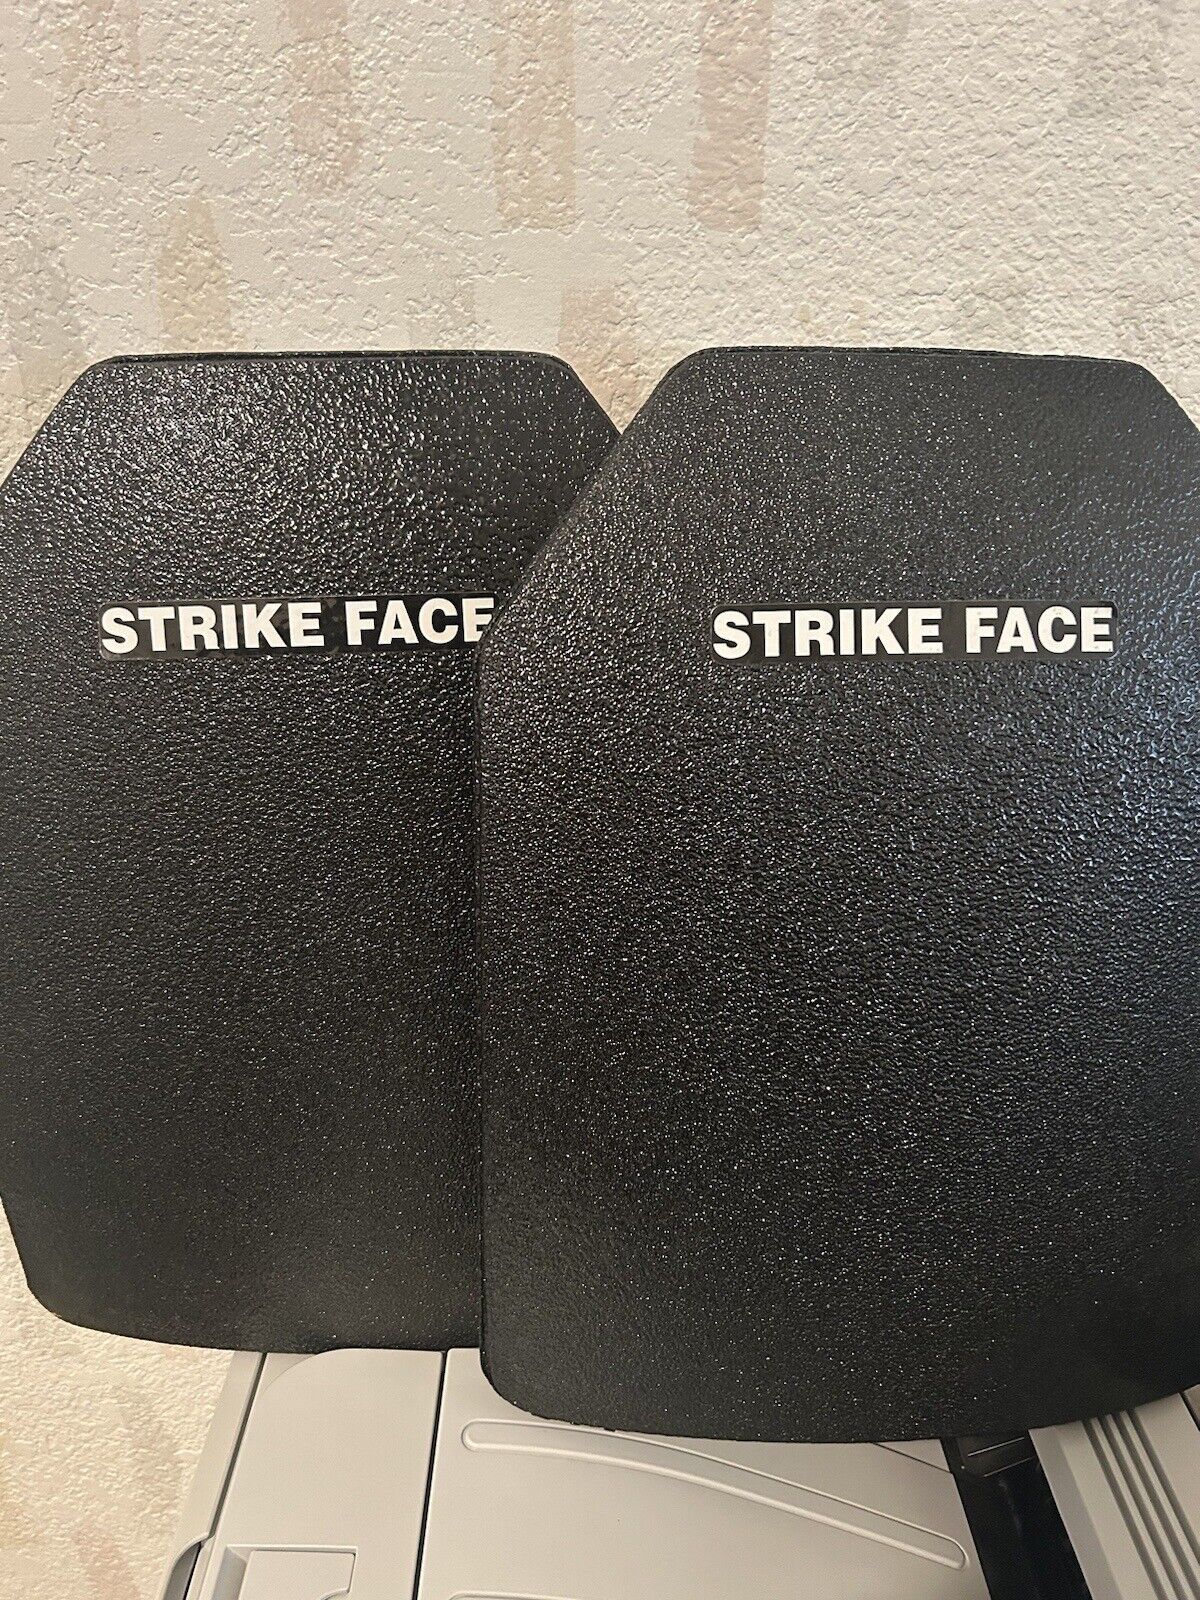 OLD GEN SOF Ballistic Plates Strike Face Gamma Plus Body Armor Size XLG OIF OEF